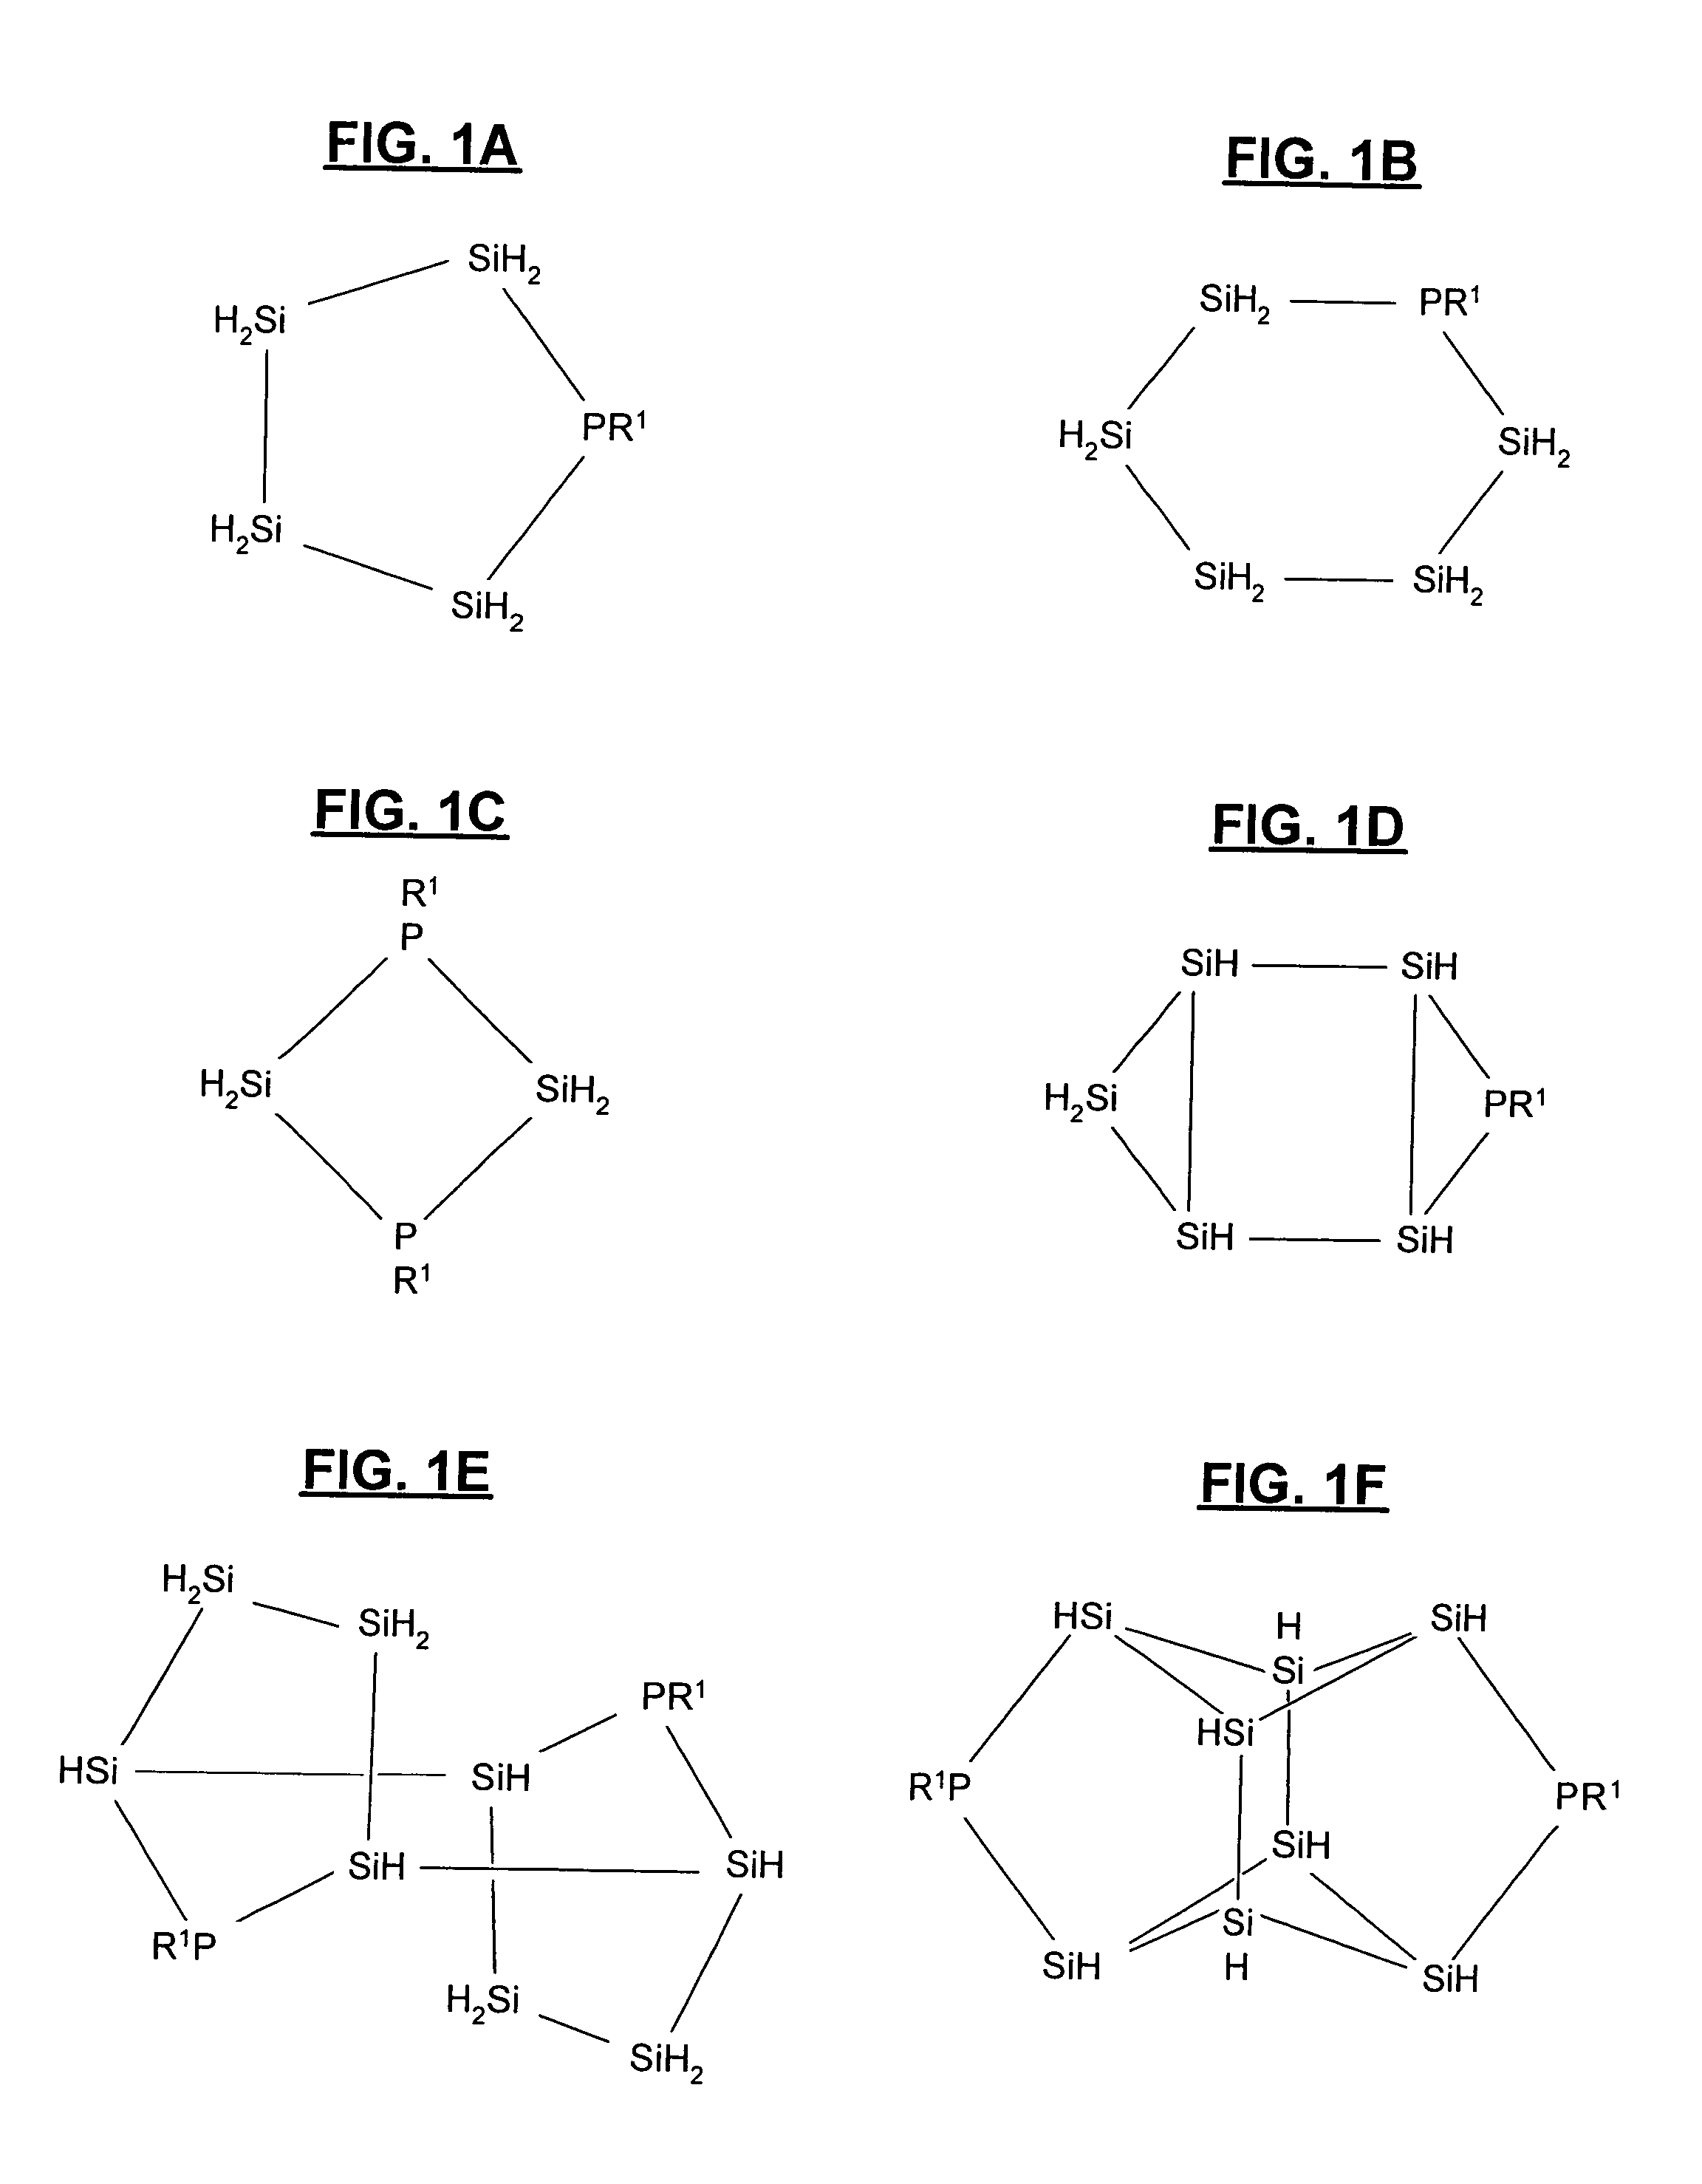 Heterocyclic semiconductor precursor compounds, compositions containing the same, and methods of making such compounds and compositions